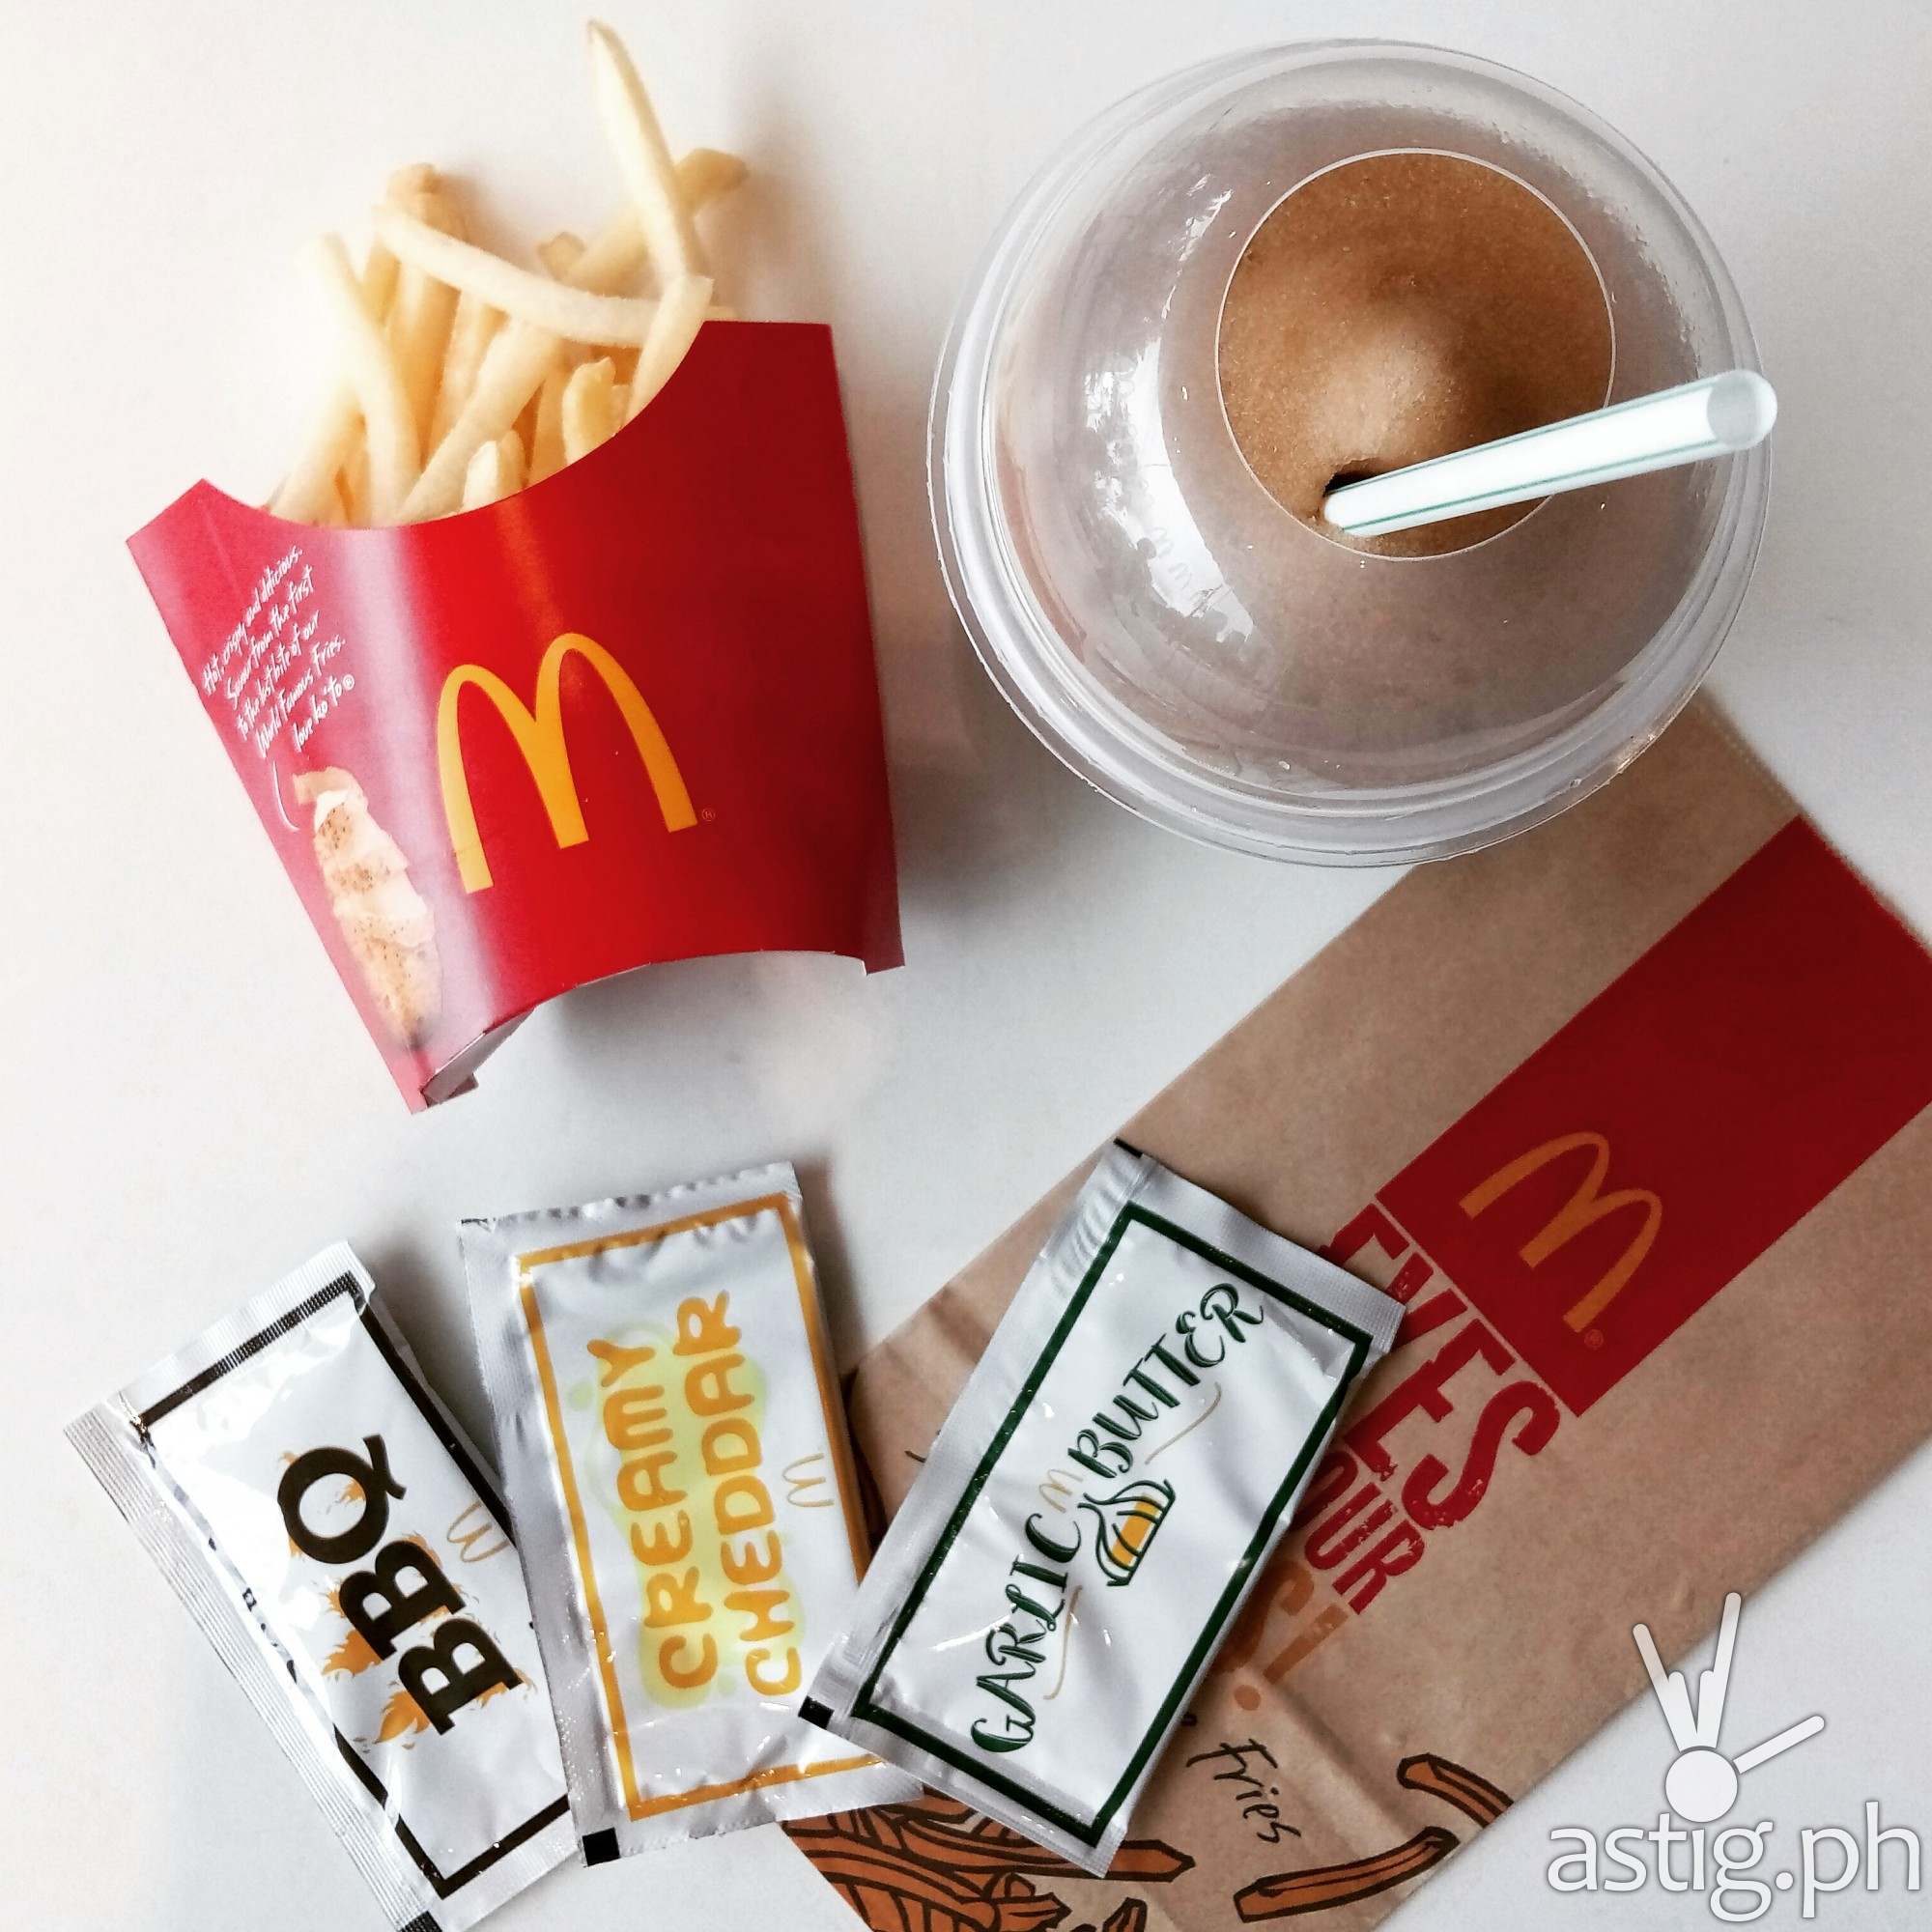 McDonald's Shake Shake fries comes in 3 flavors: BBQ, Cheese, and Garlic Butter